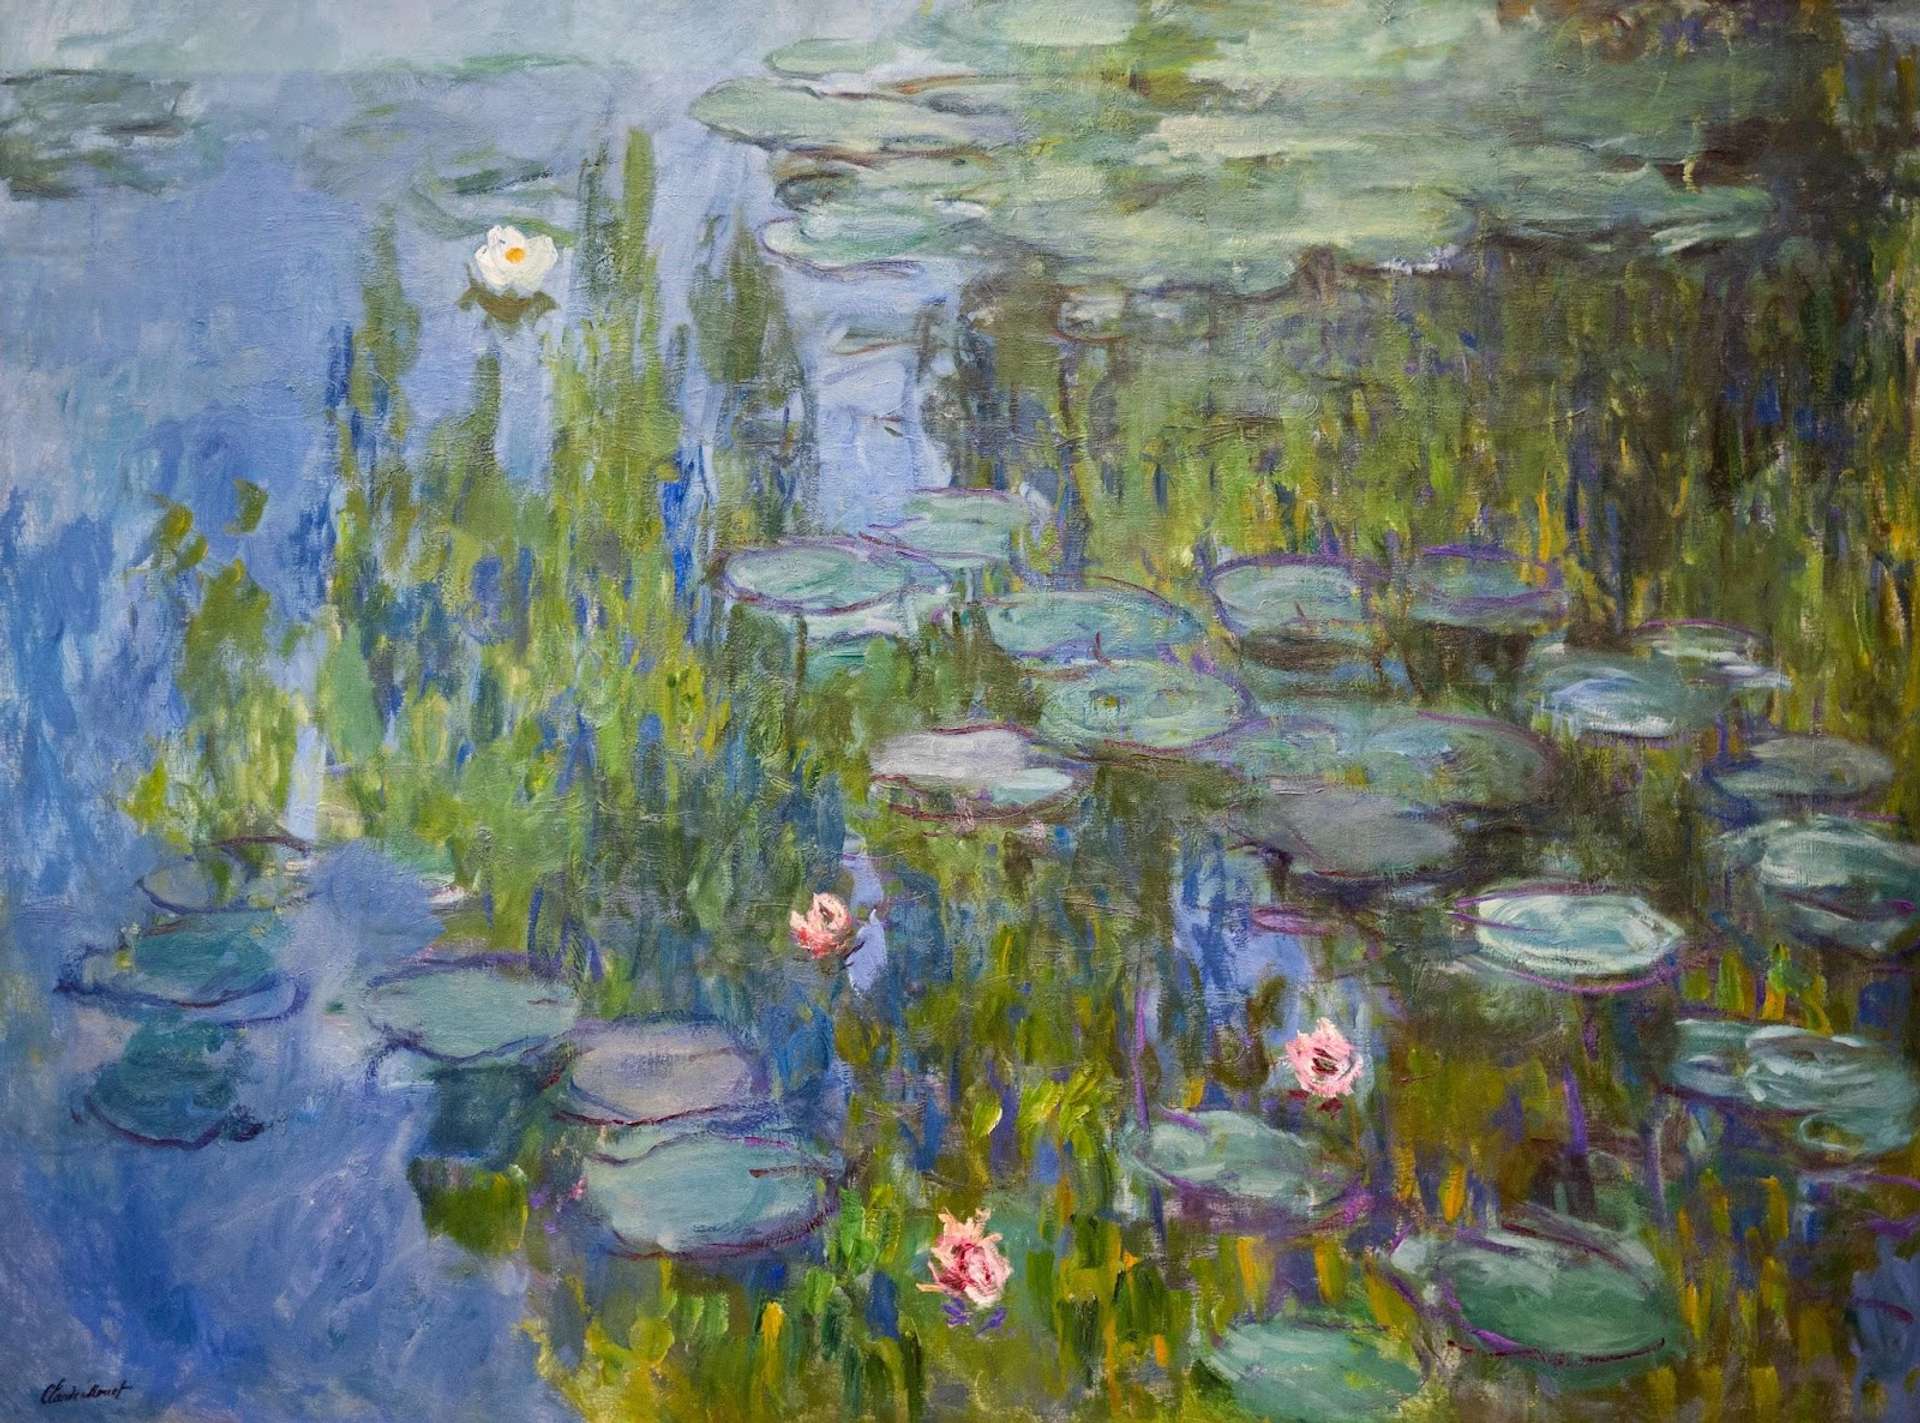 An image of a painting by Claude Monet, from his Water Lilies series. It shows several water lilies in a pond, which reflects the sky.